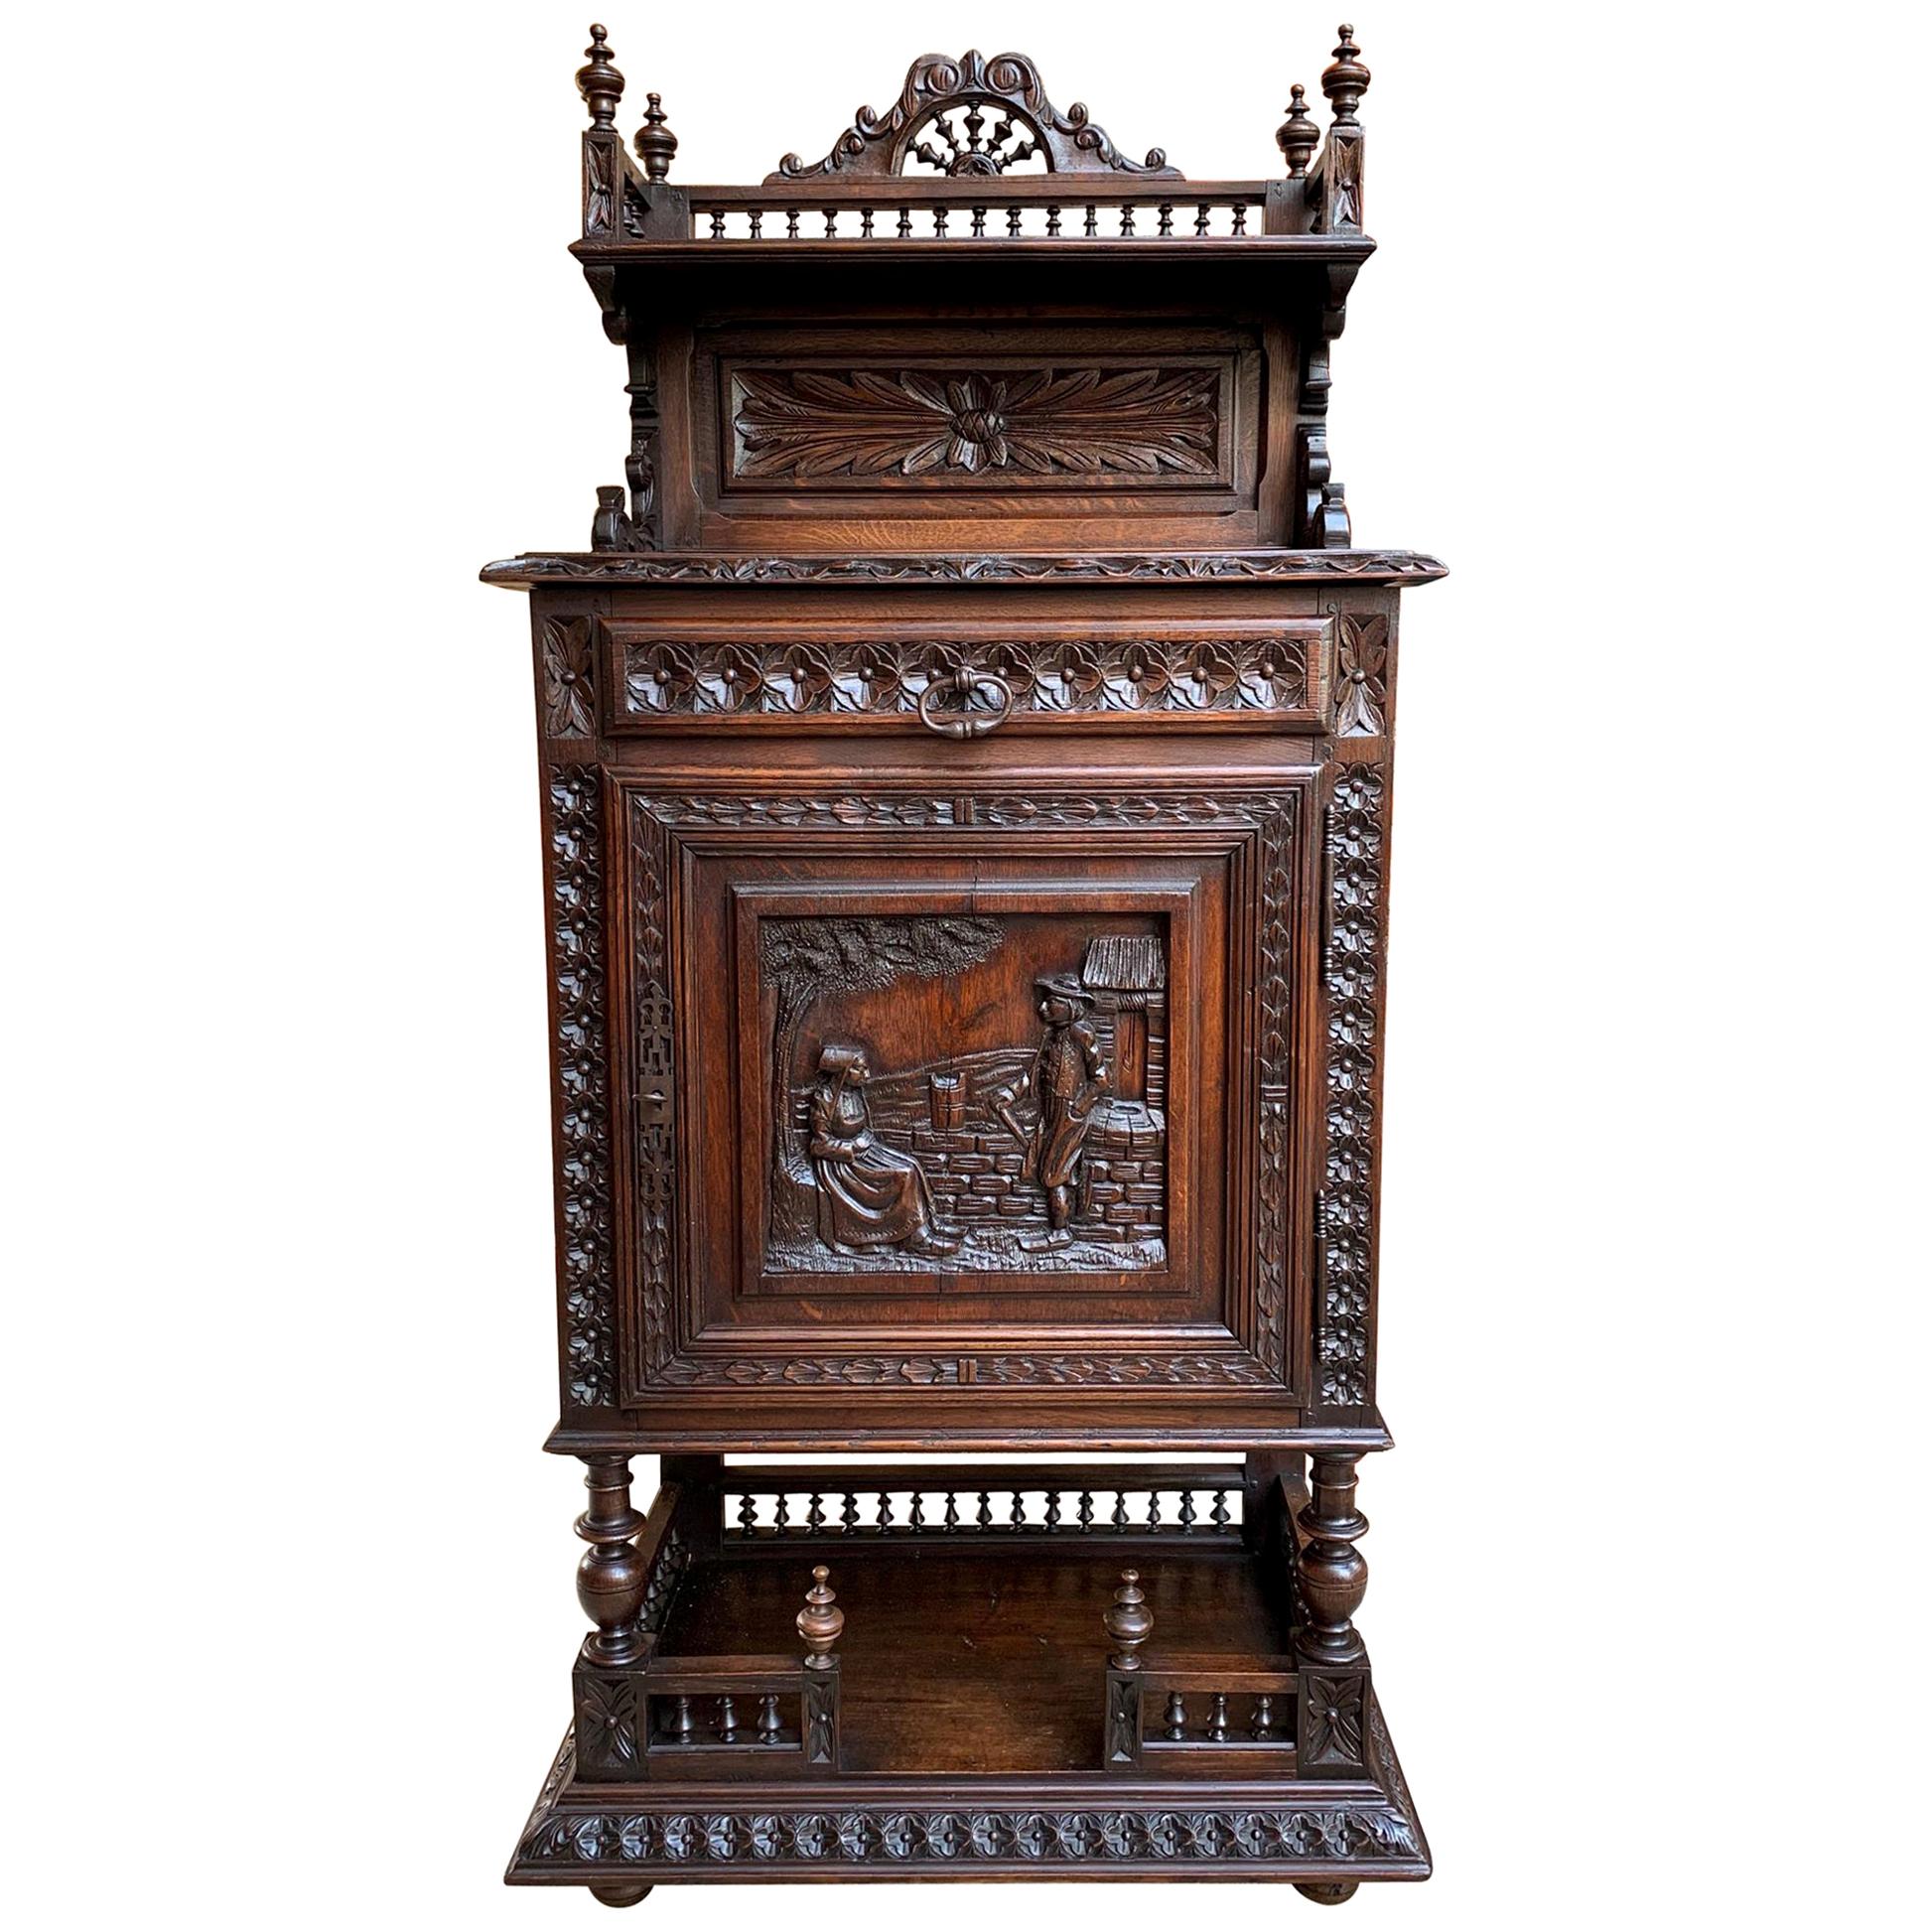 19th Century Antique French Carved Oak Confiturier Wine Cabinet Display Brittany